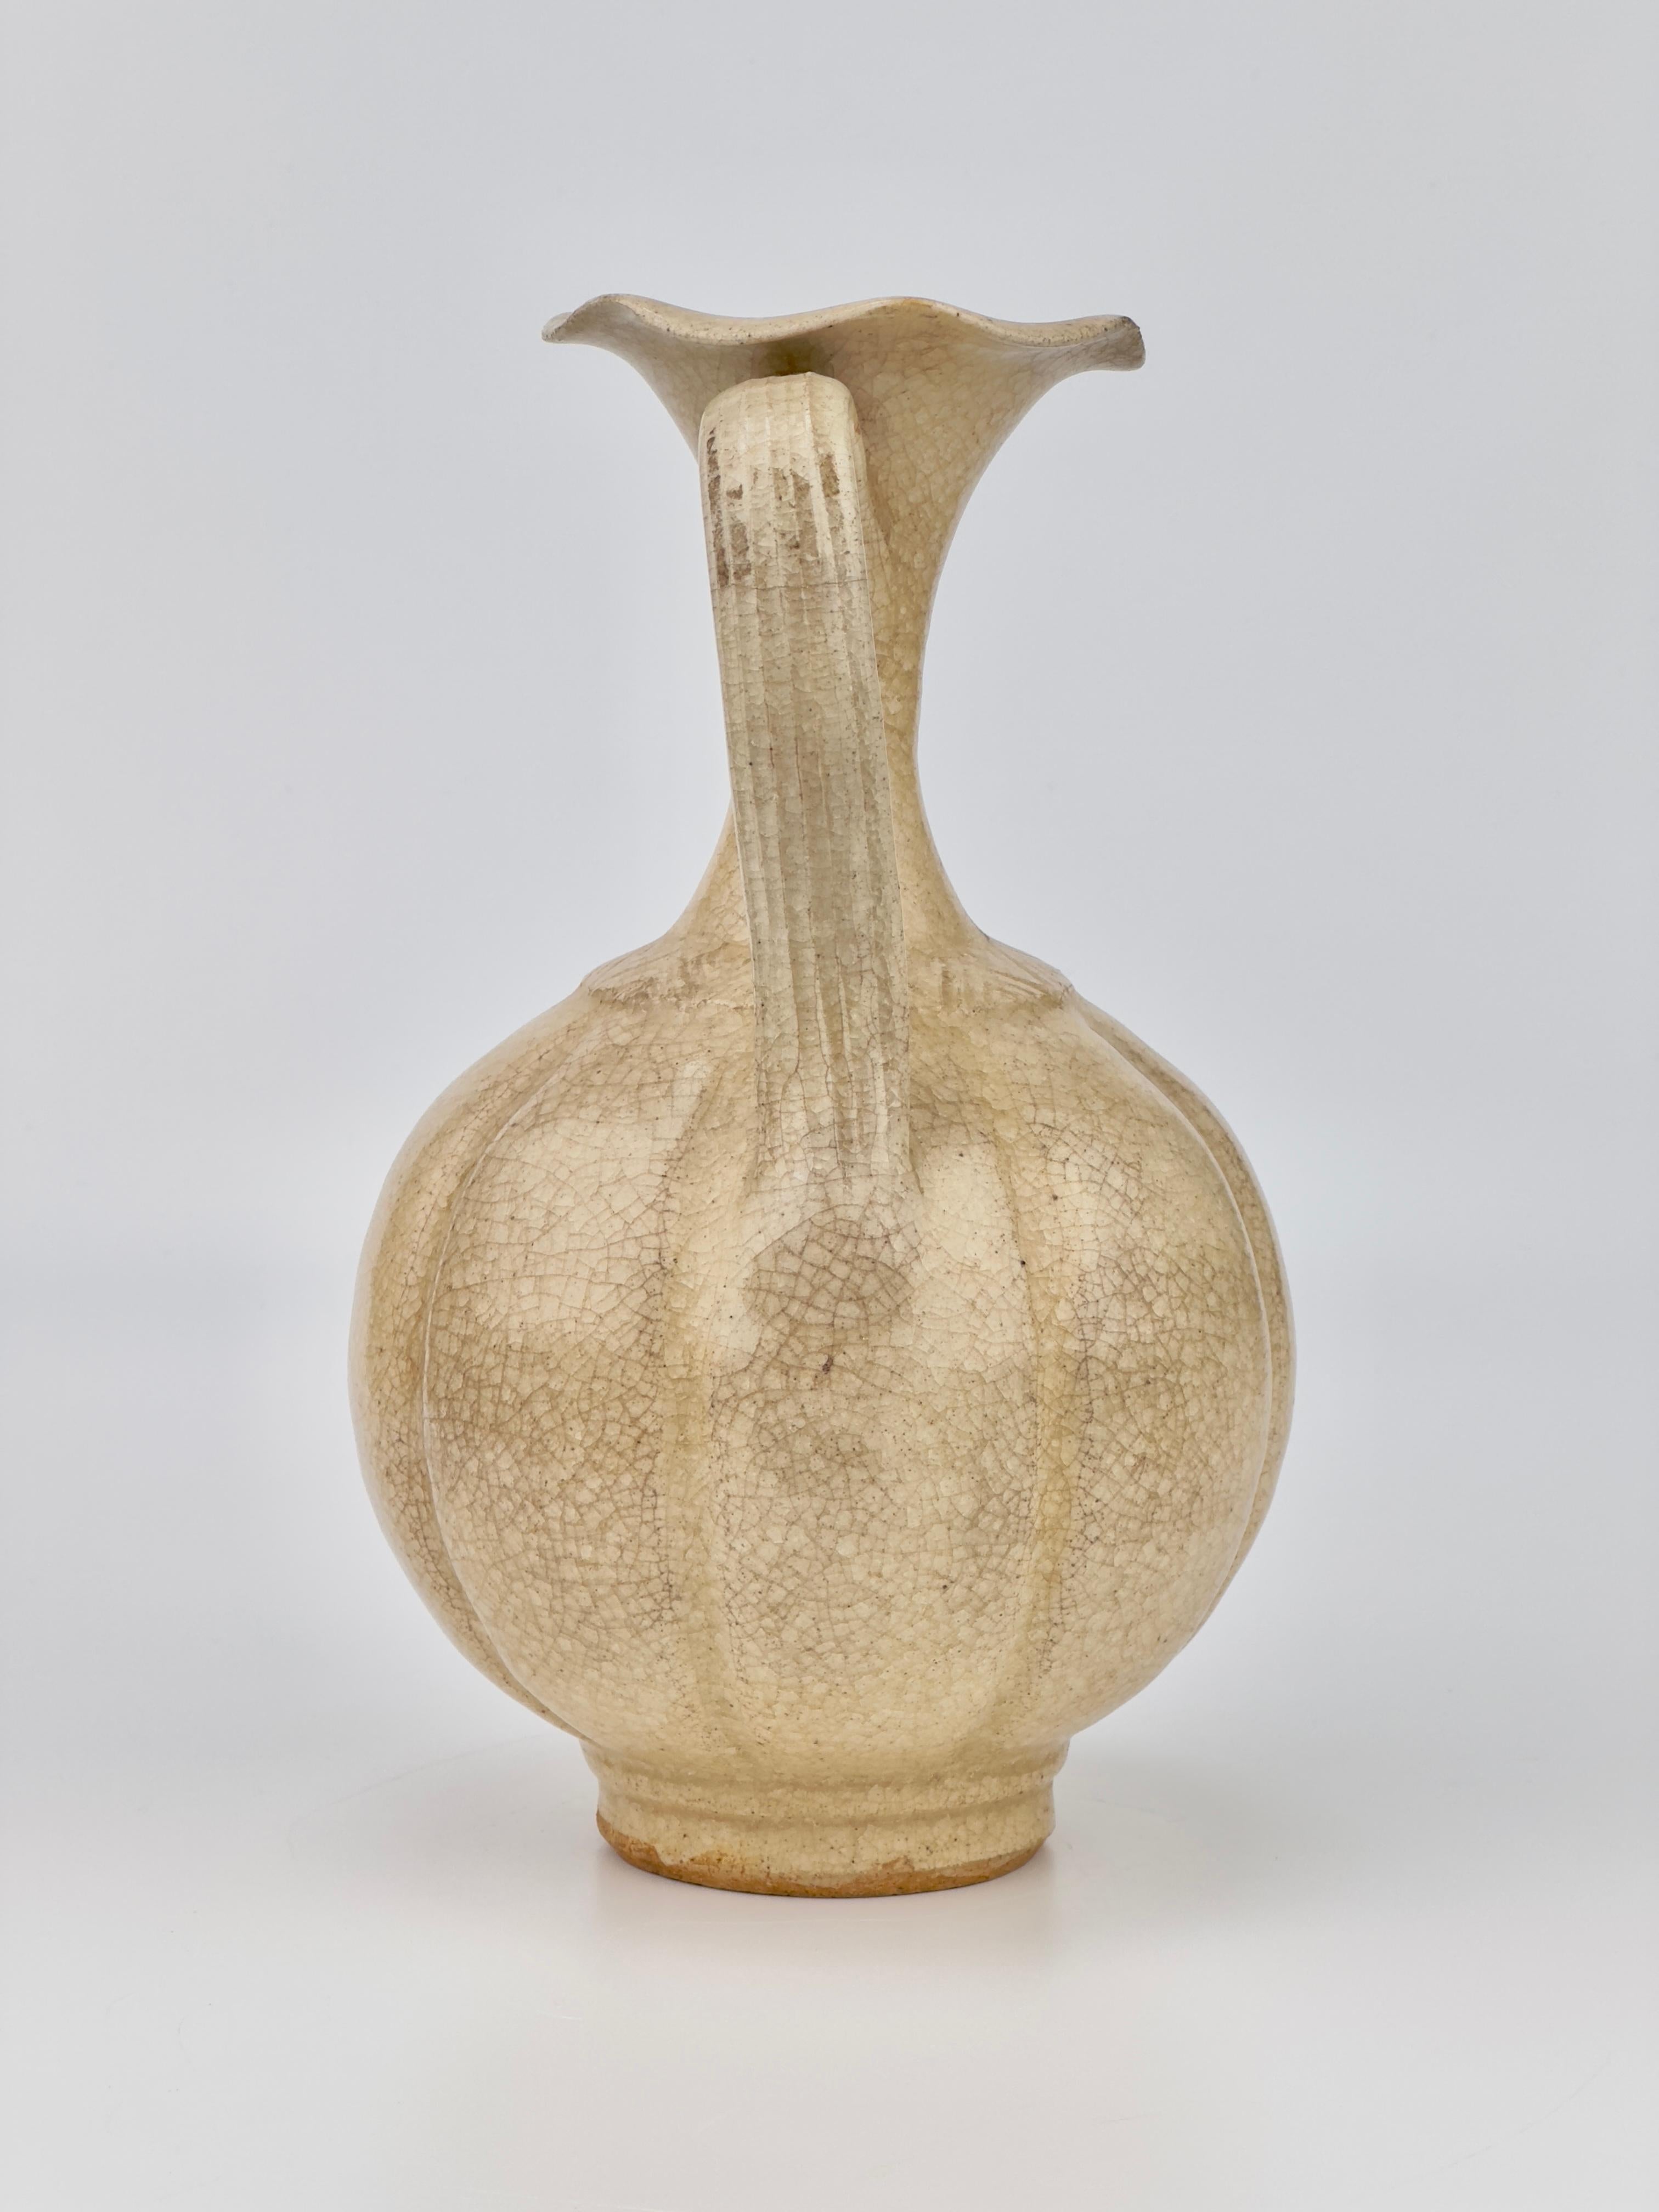 Famous annamese cream glazed ceramic ewer covered with a cream glaze. Traces of excavation are clearly visible in the glaze.


Dates : Presumably Ly Dynasty (11-13th century)
Region : Vietnam
Type : Ewer
Found/Acquired : Southeast Asia , South China